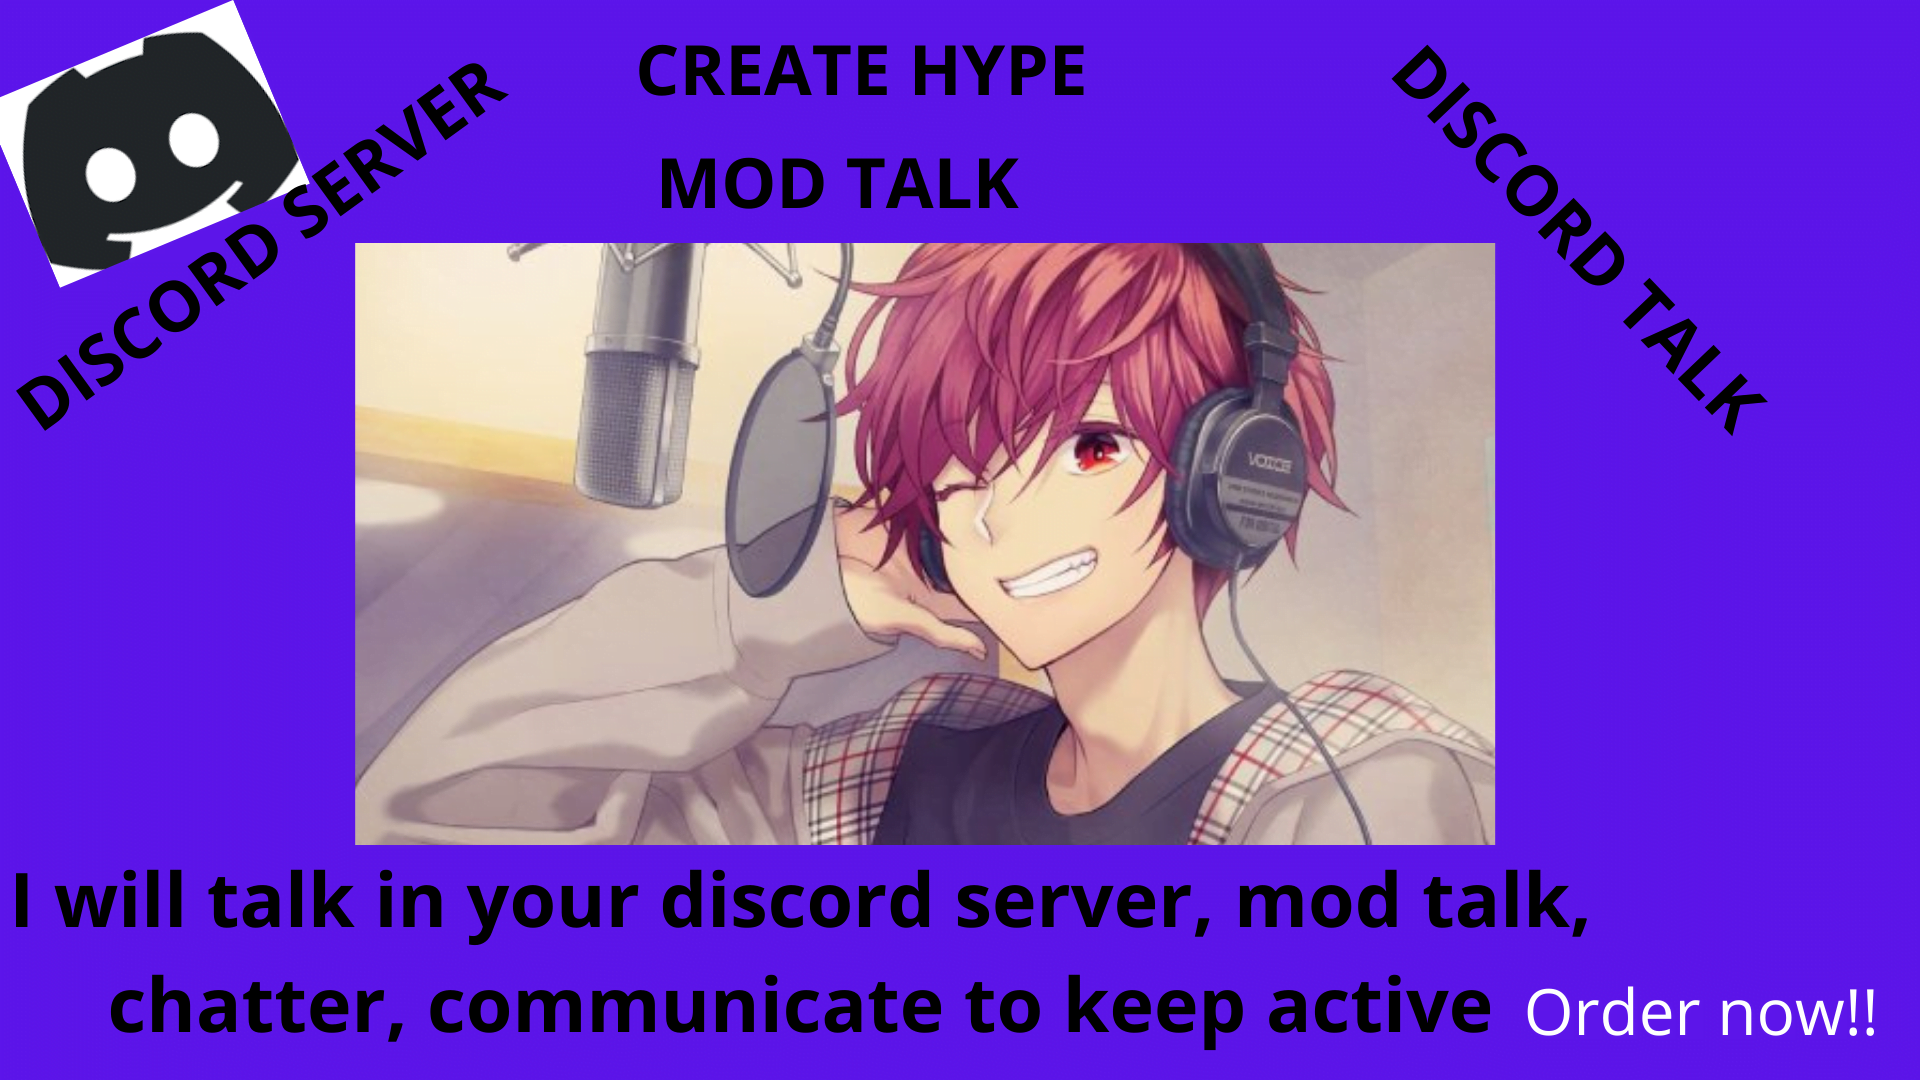 I will talk in your discord server, mod talk, chatter, communicate to keep active, FiverrBox